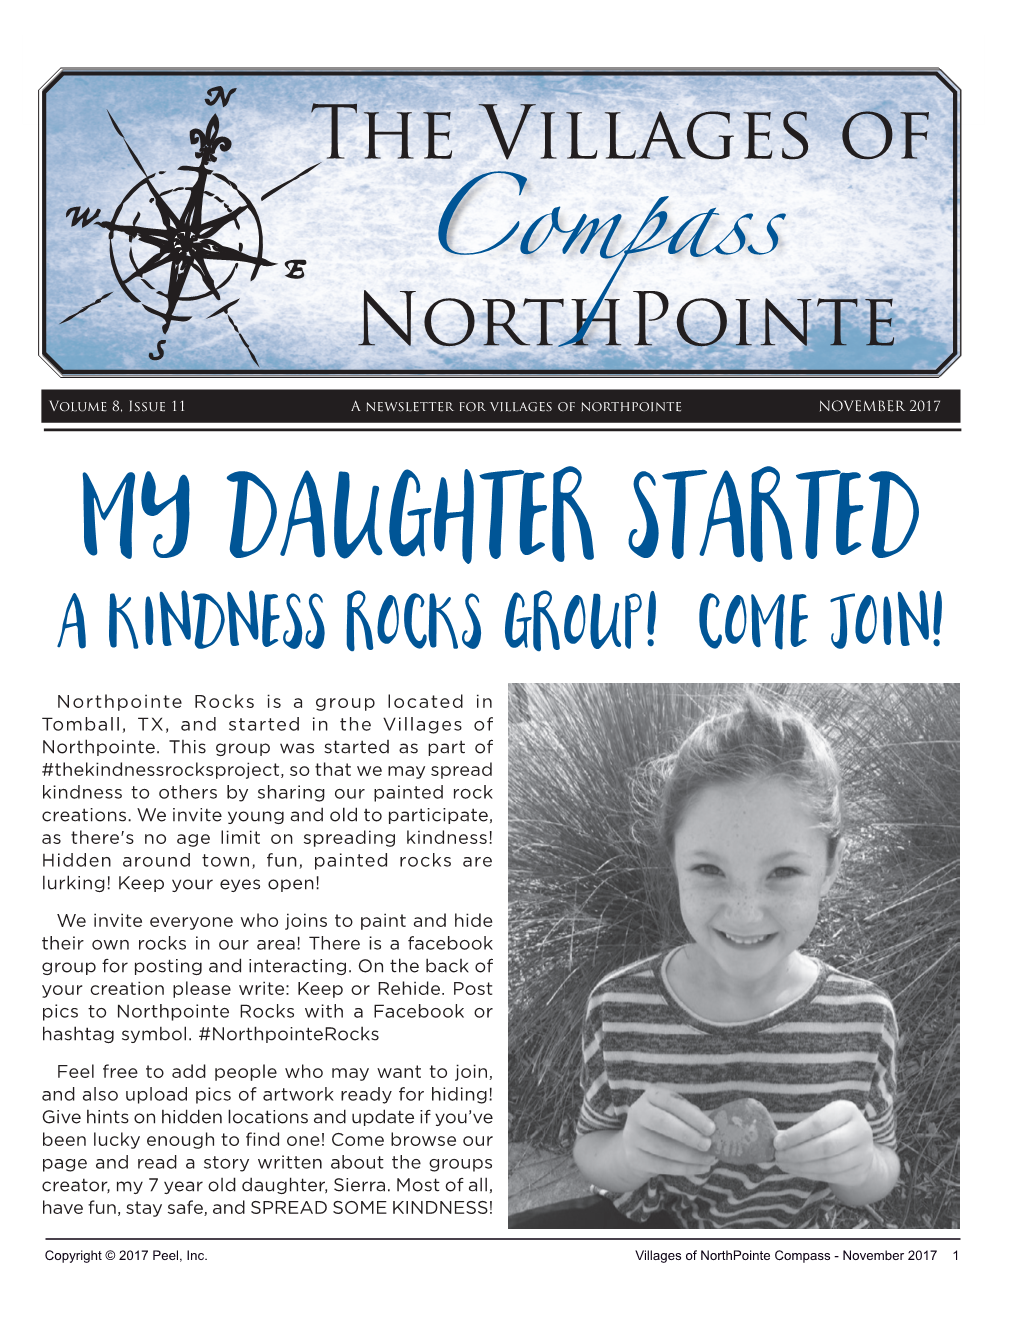 My Daughter Started a Kindness Rocks Group! Come Join!